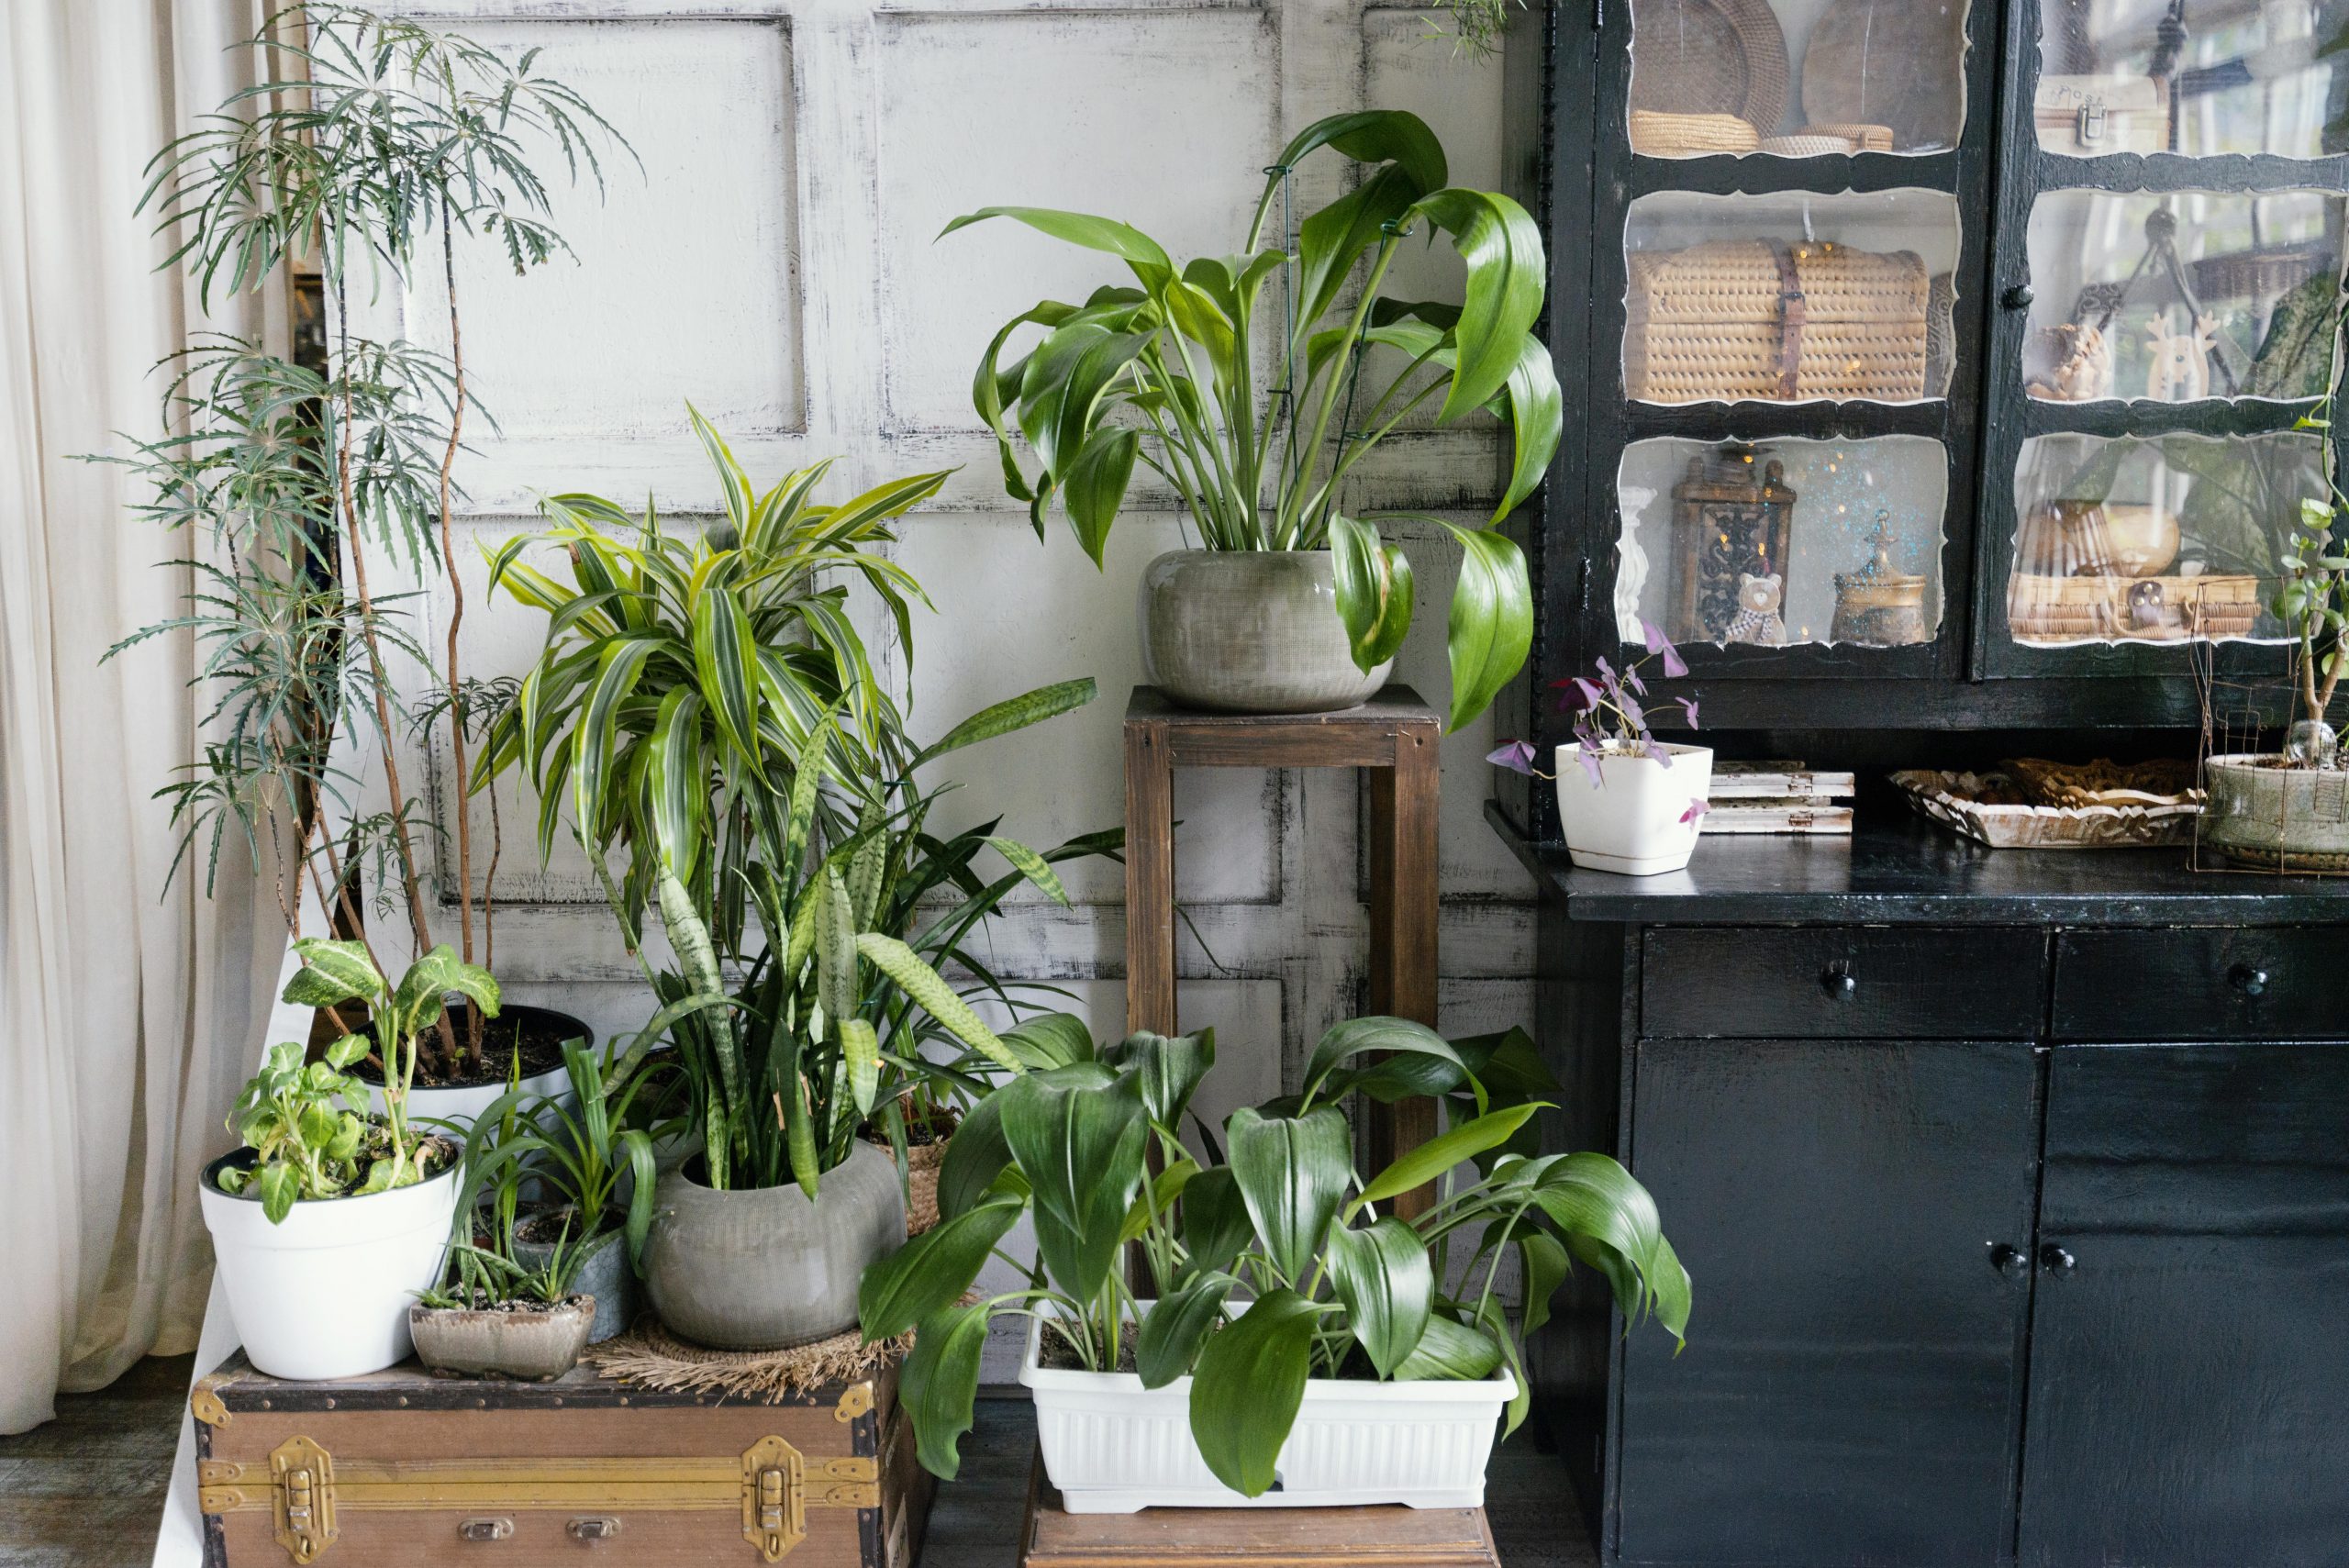 BRING NATURE INTO YOUR HOME - HOW TO EMBRACE WINTER GREENERY